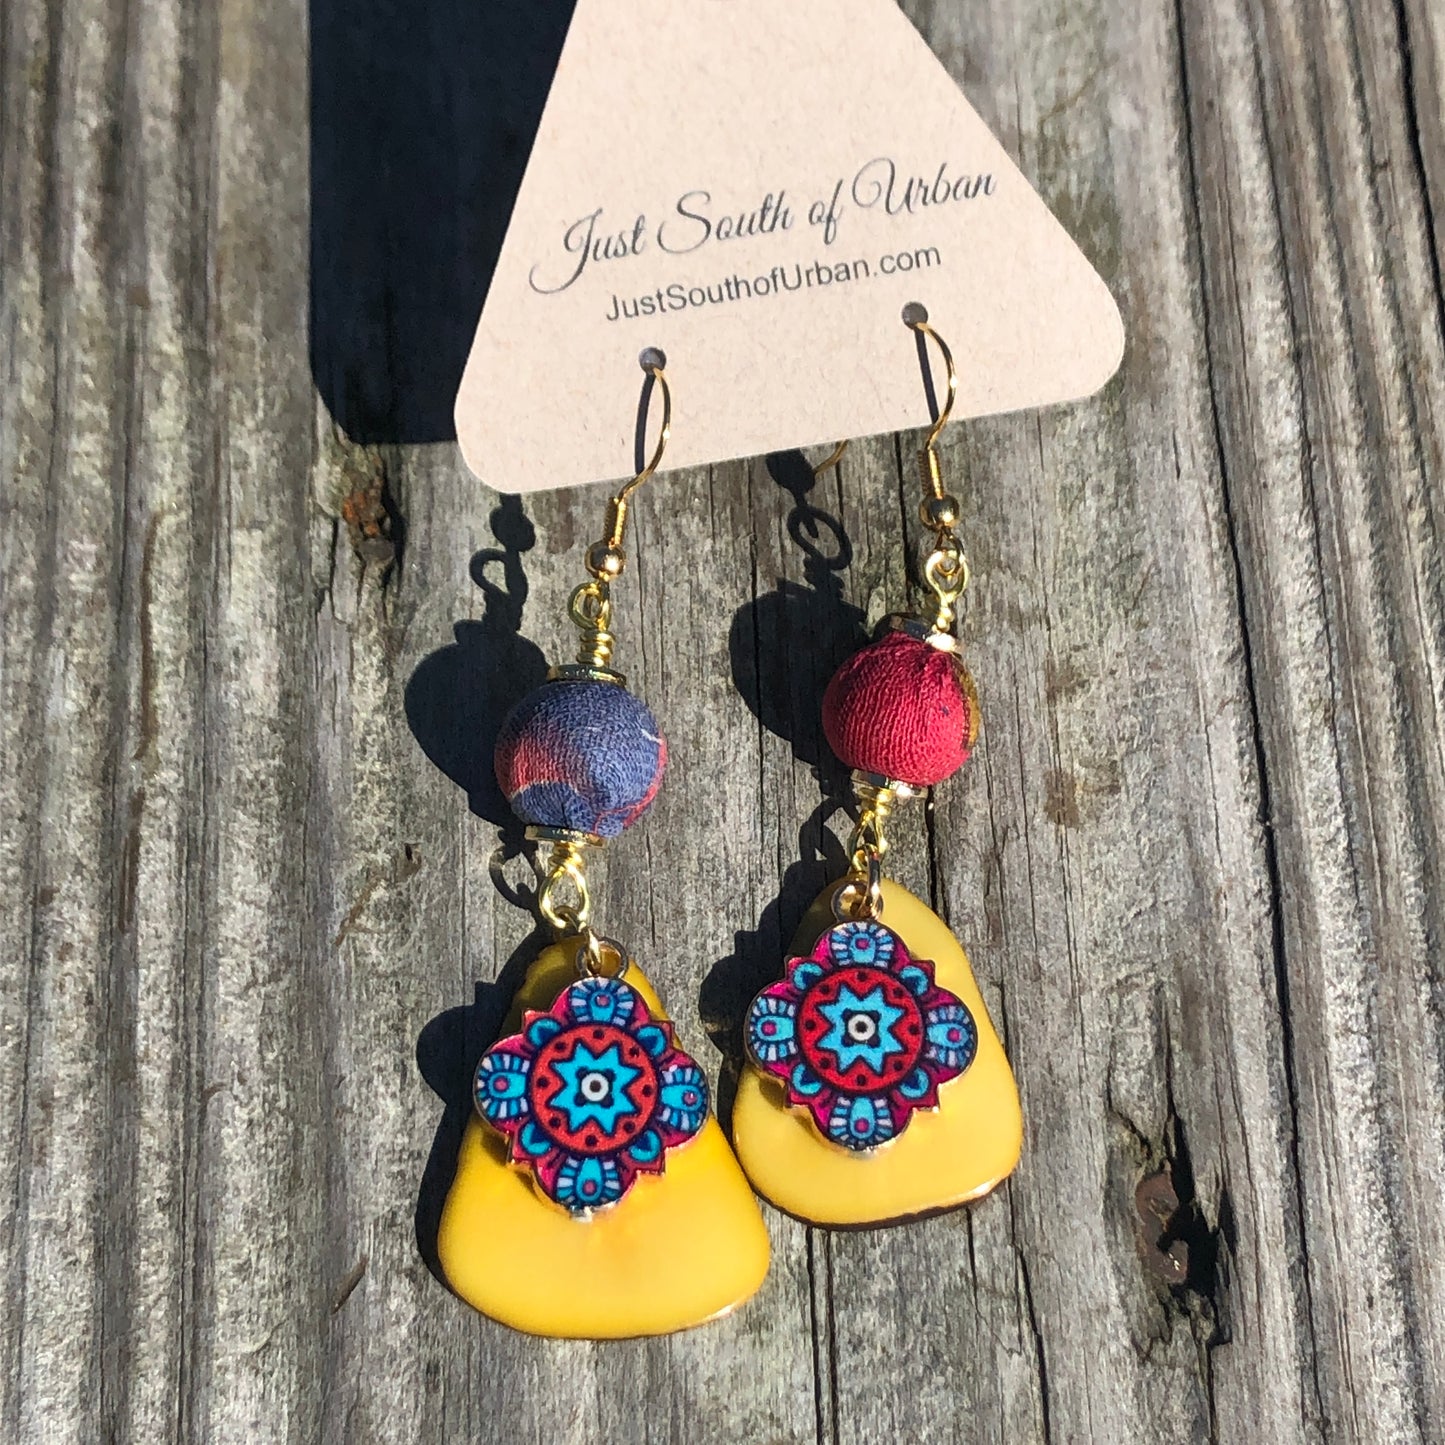 Tagua Nut, Bohemian Charm and Fabric from India Earrings